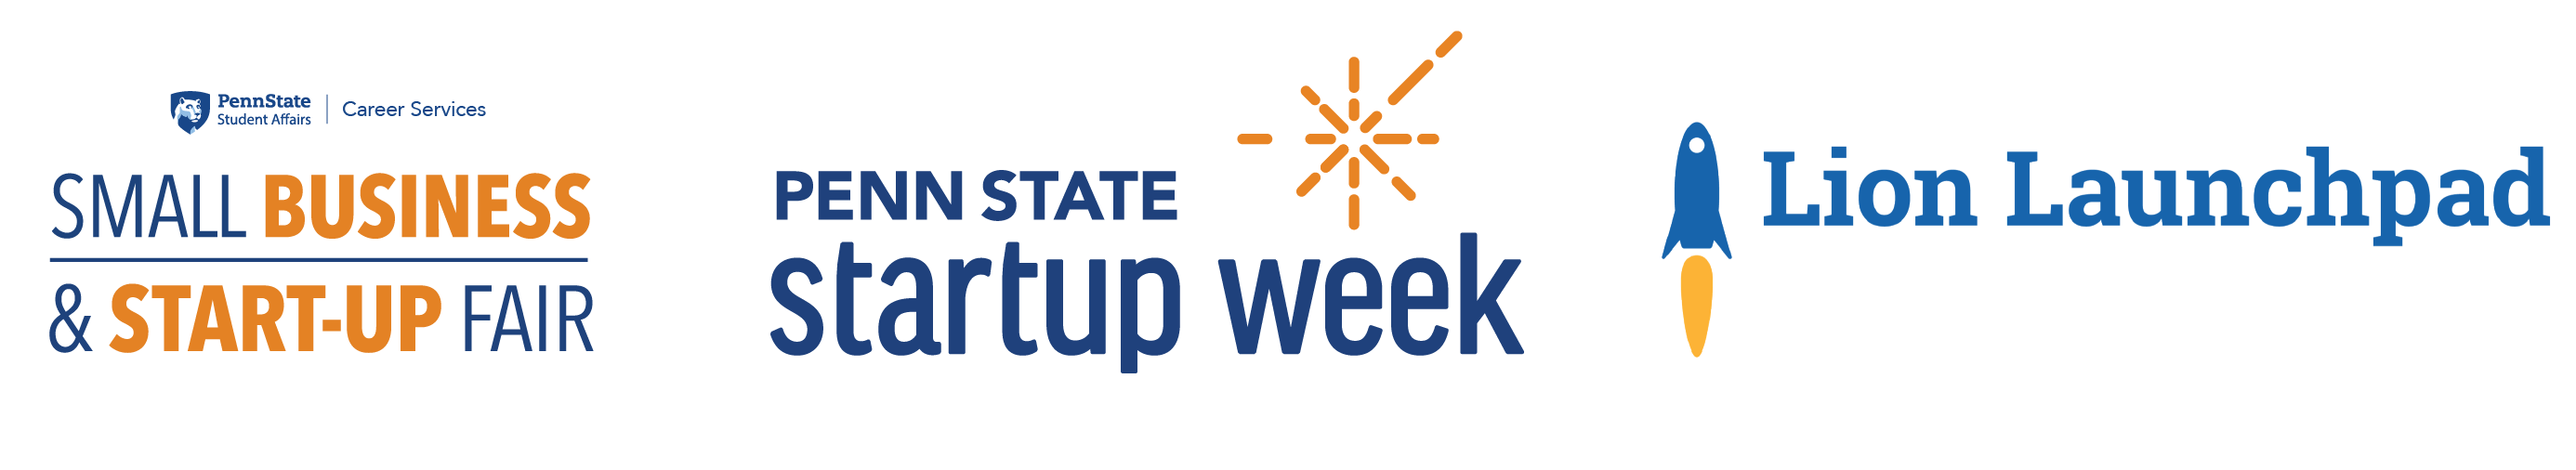 Small Business and Start Up Fair, Penn State Startup Week, Lion Launchpad